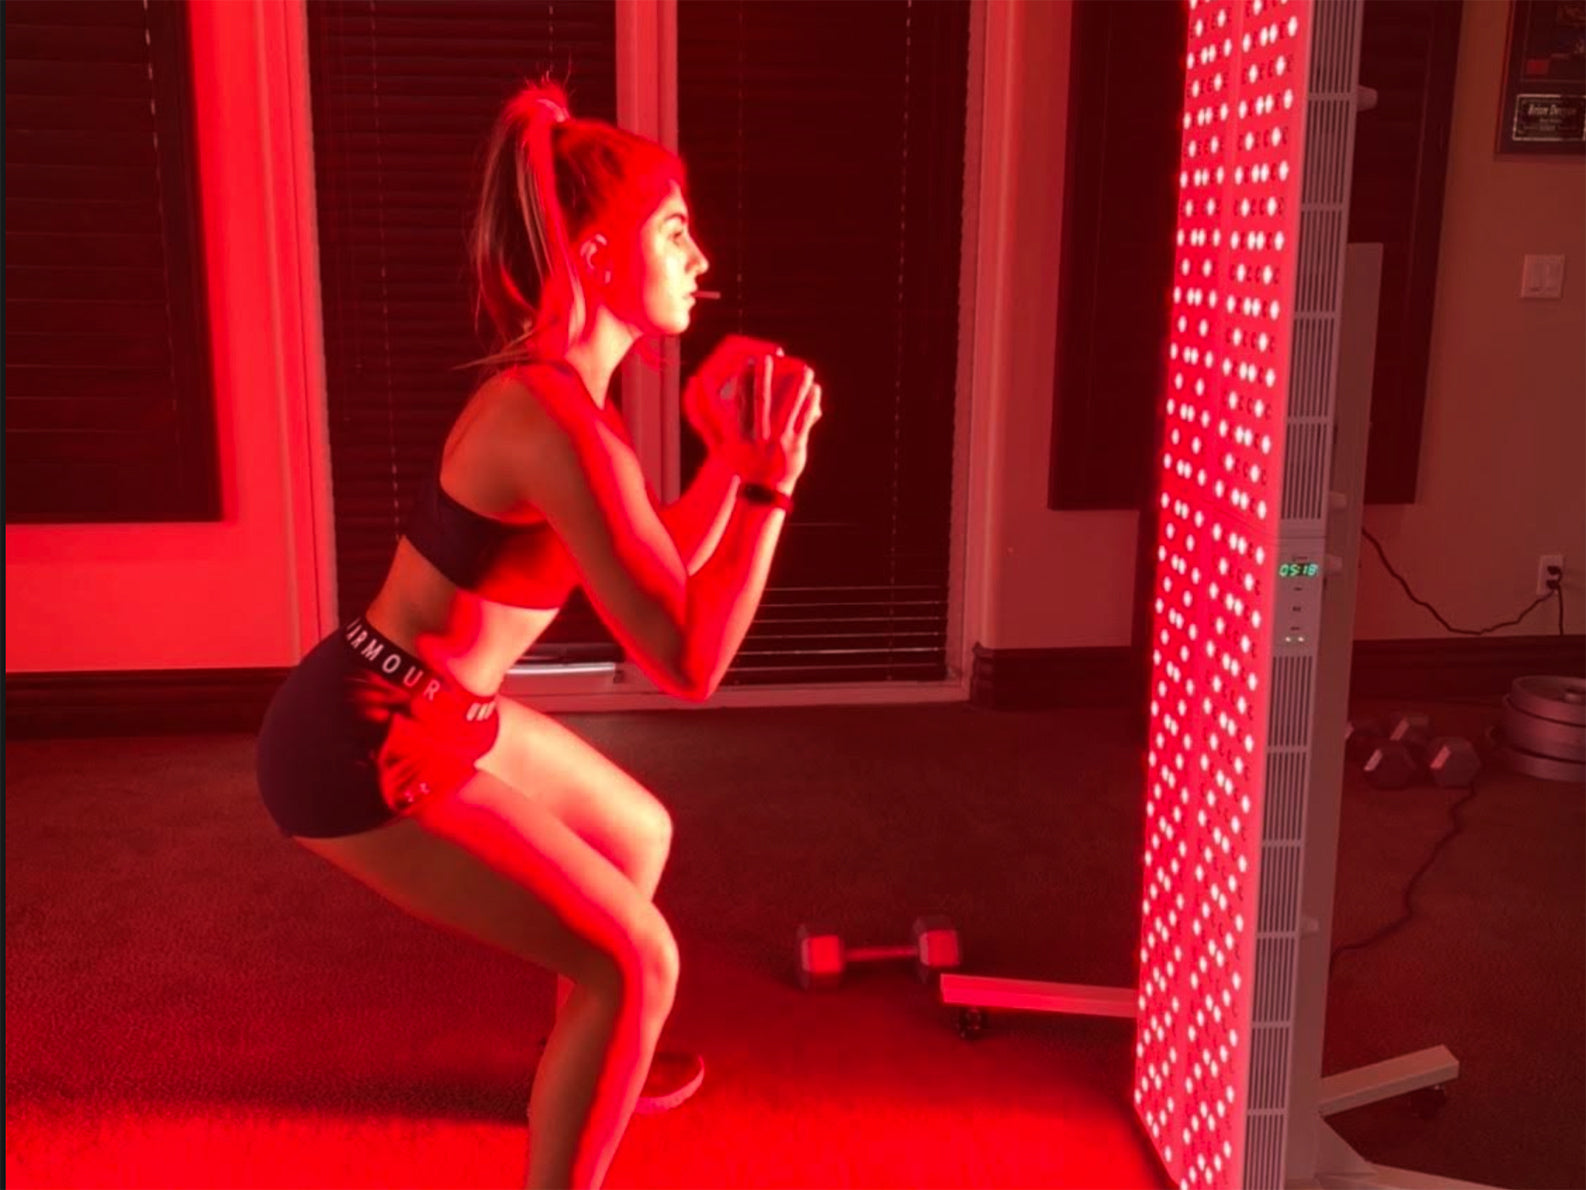 Hailie Deegan balances her workout and recovery routine with Joovv red light therapy